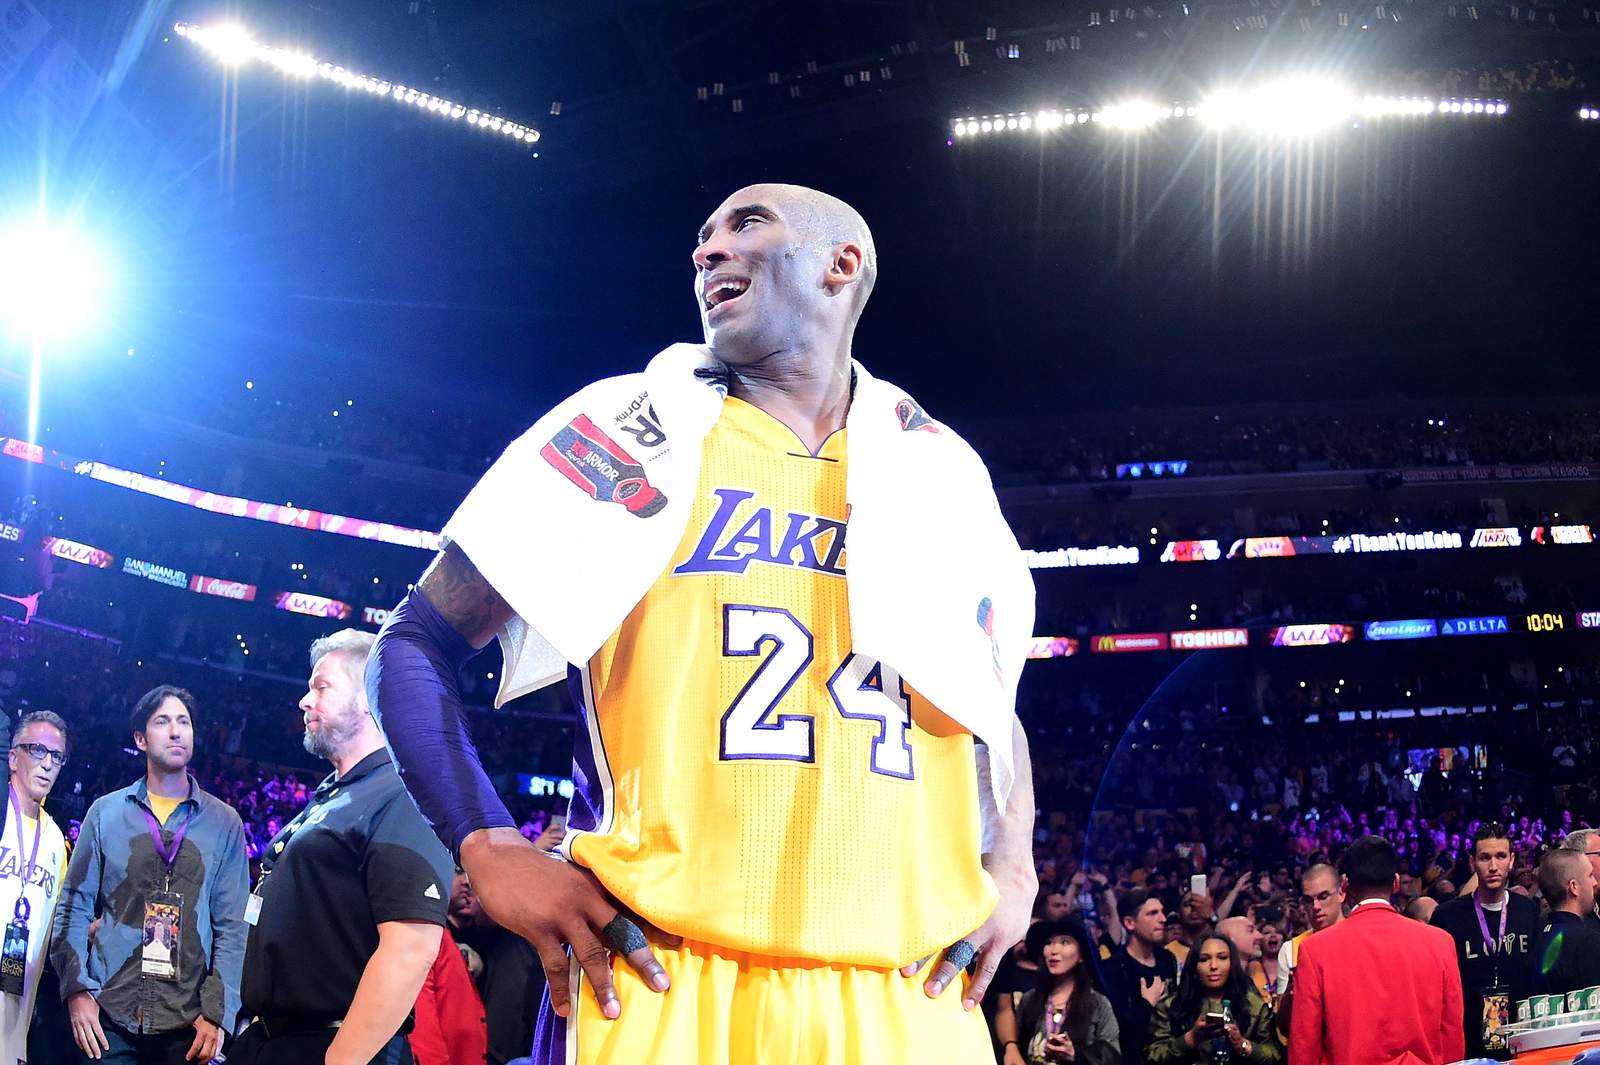 Kobe Bryant celebrates after scoring 60 points in his final NBA game at Staples Center. It was April 13, 2016 and the Lakers defeated the Utah Jazz, 101-96.